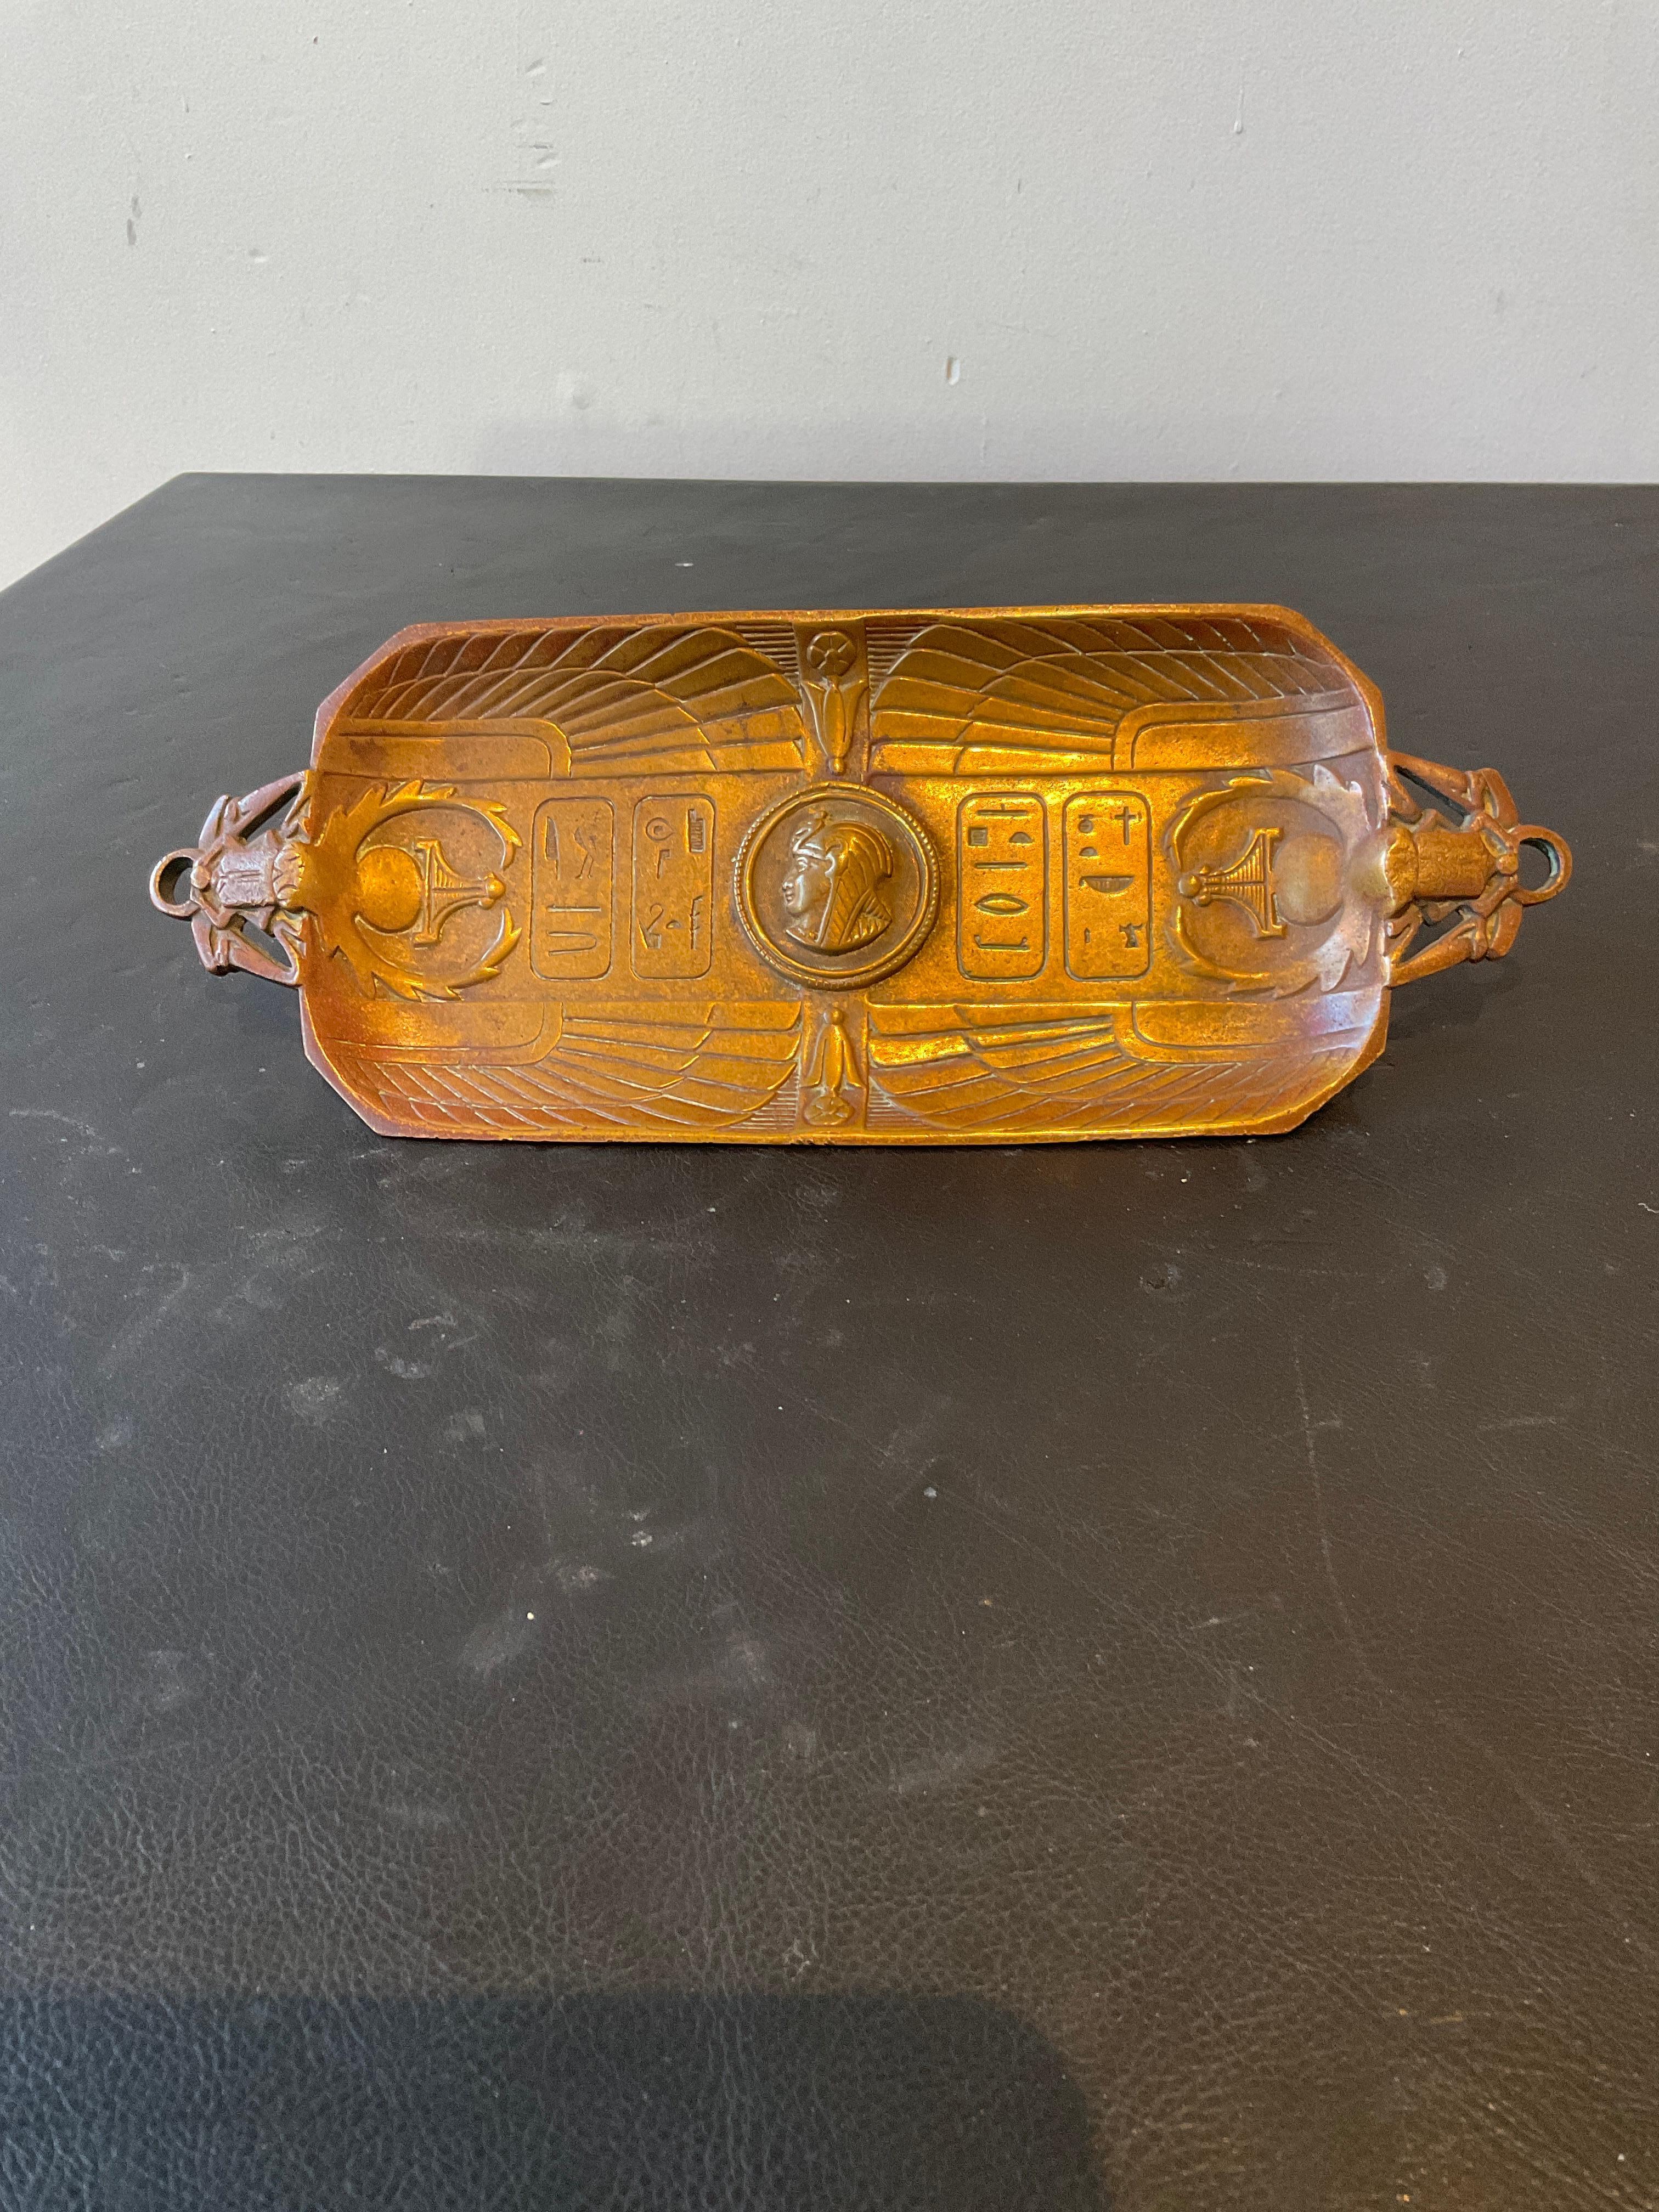 1880s Egyptian Revival bronze tray. Used on the TV show The Marvelous Mrs. Maisel.